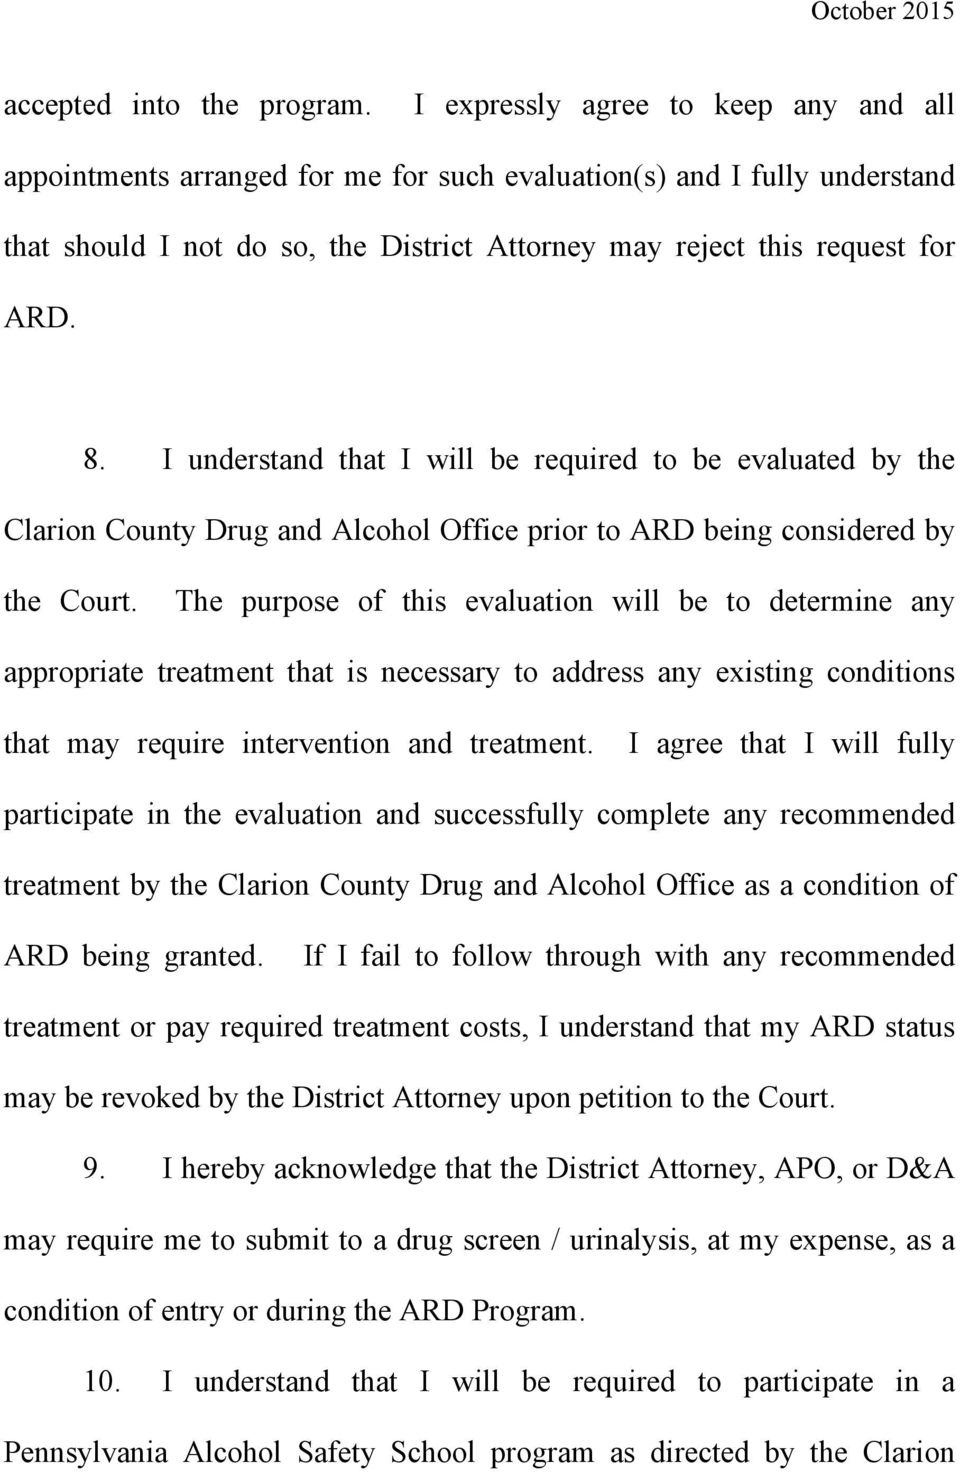 I understand that I will be required to be evaluated by the Clarion County Drug and Alcohol Office prior to ARD being considered by the Court.